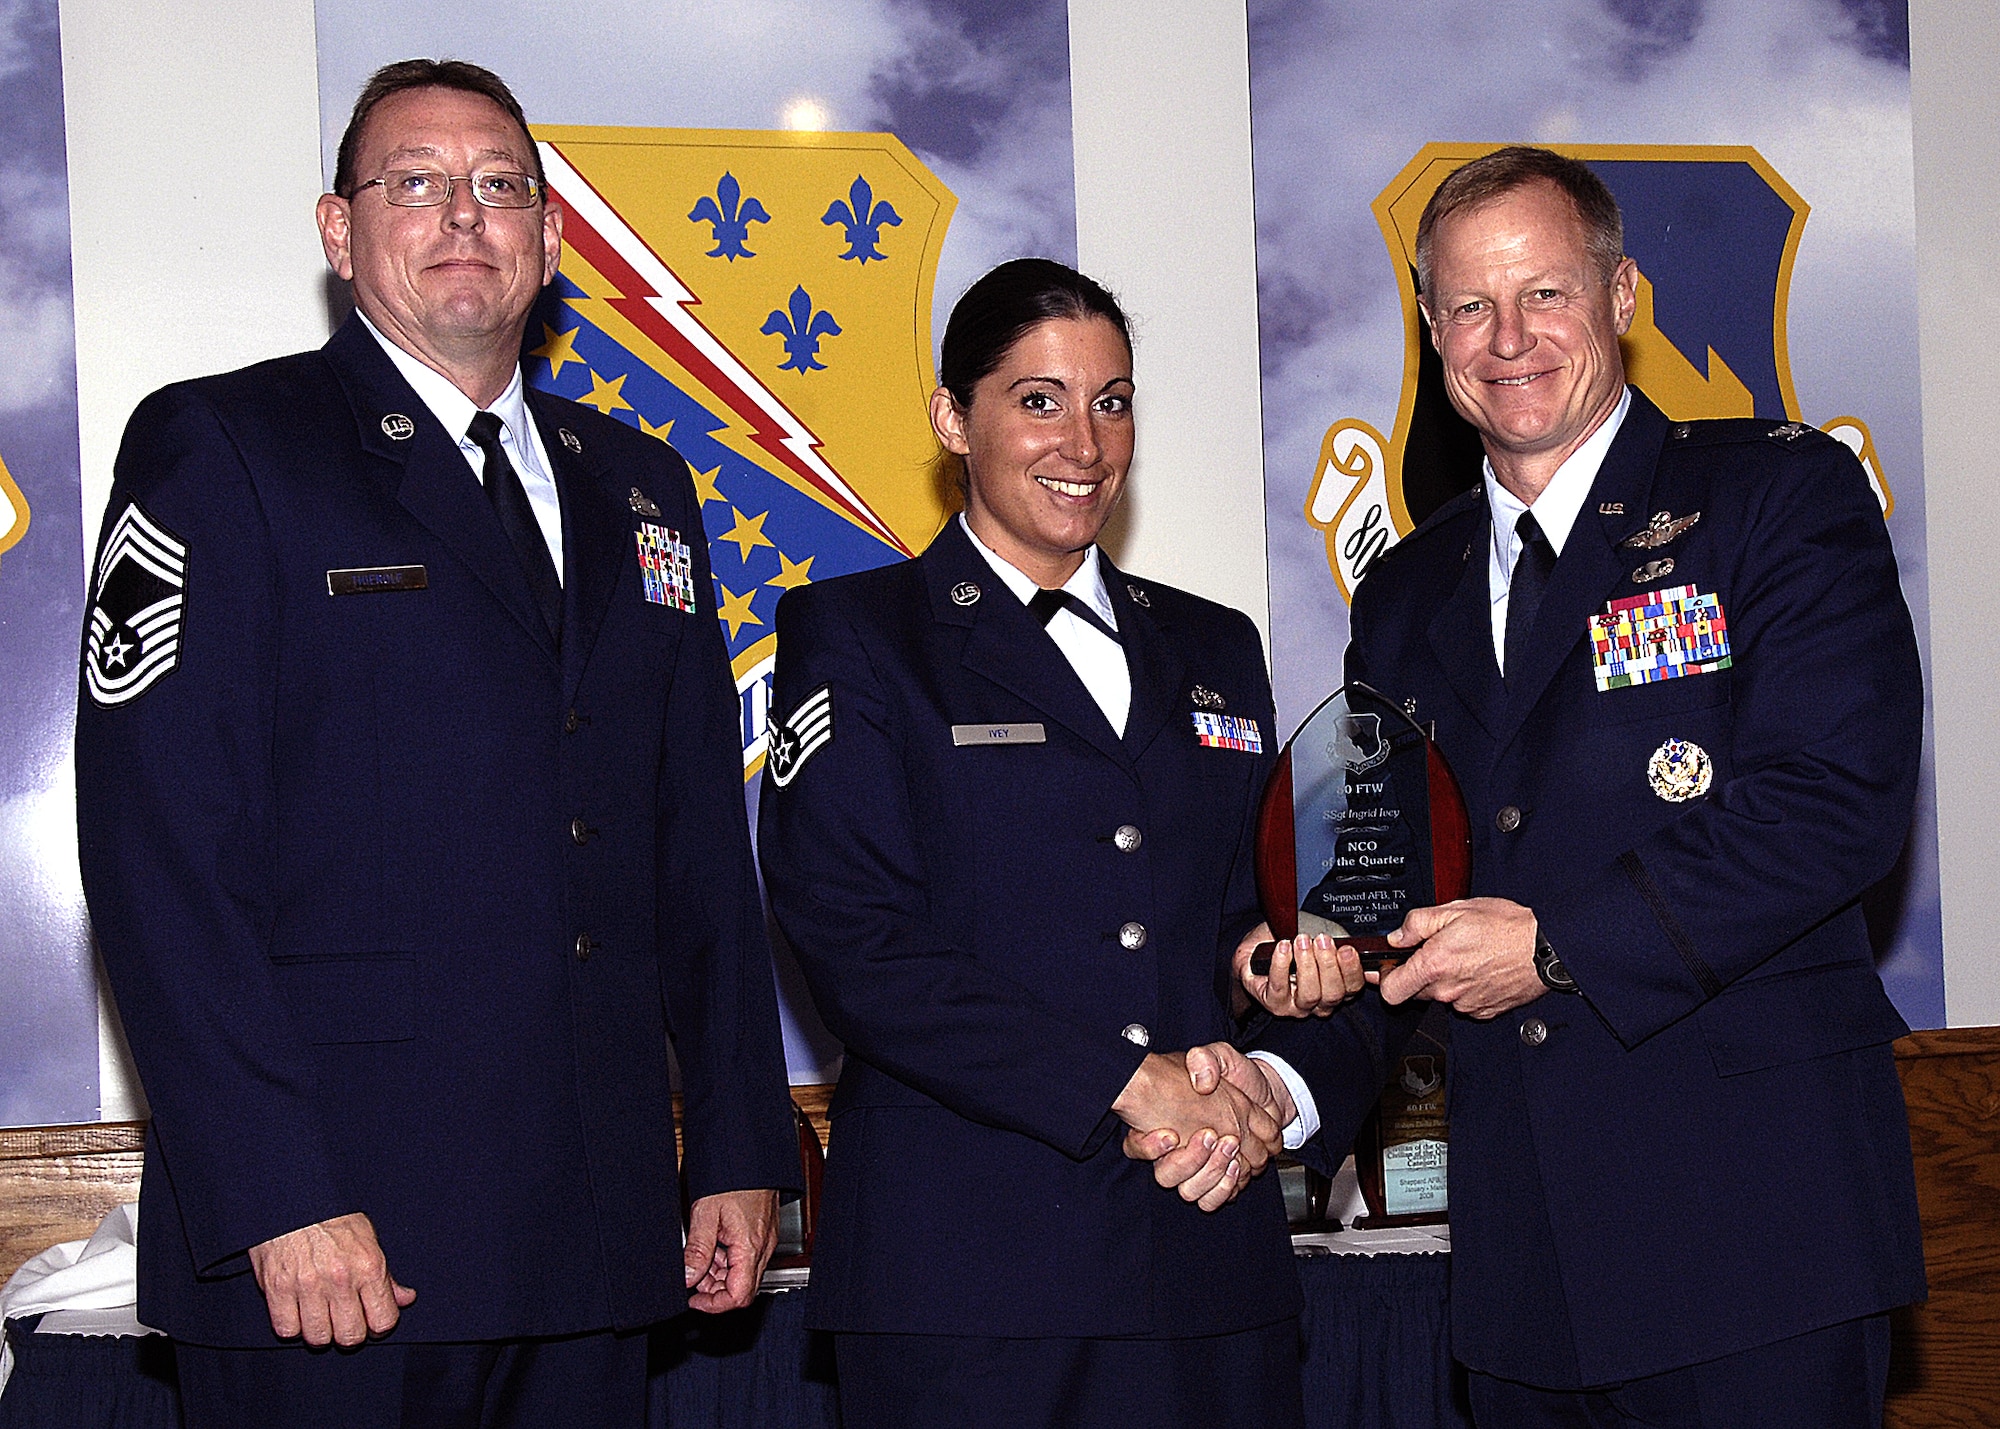 Staff Sgt. Ingrid Ivey, 80th Operations Support Squadron, accepts the NCO of the Quarter award from 80th Flying Training Wing Commander Col. David Petersen April 22 during the wing's quarterly award ceremony. Sergeant Ivey was recognized for having a 98 percent quality assurance rating on more than 400 parachutes, oxygen connectors and other flight equipment. Sergeant Ivey also led the way for other OSS personnel to provide community support to the Center for Animal Research and Education. Also pictured is 80th FTW Superintendent Chief Master Sgt. Norman Theirolf. (U.S. Air Force photos/Harry Tonemah)